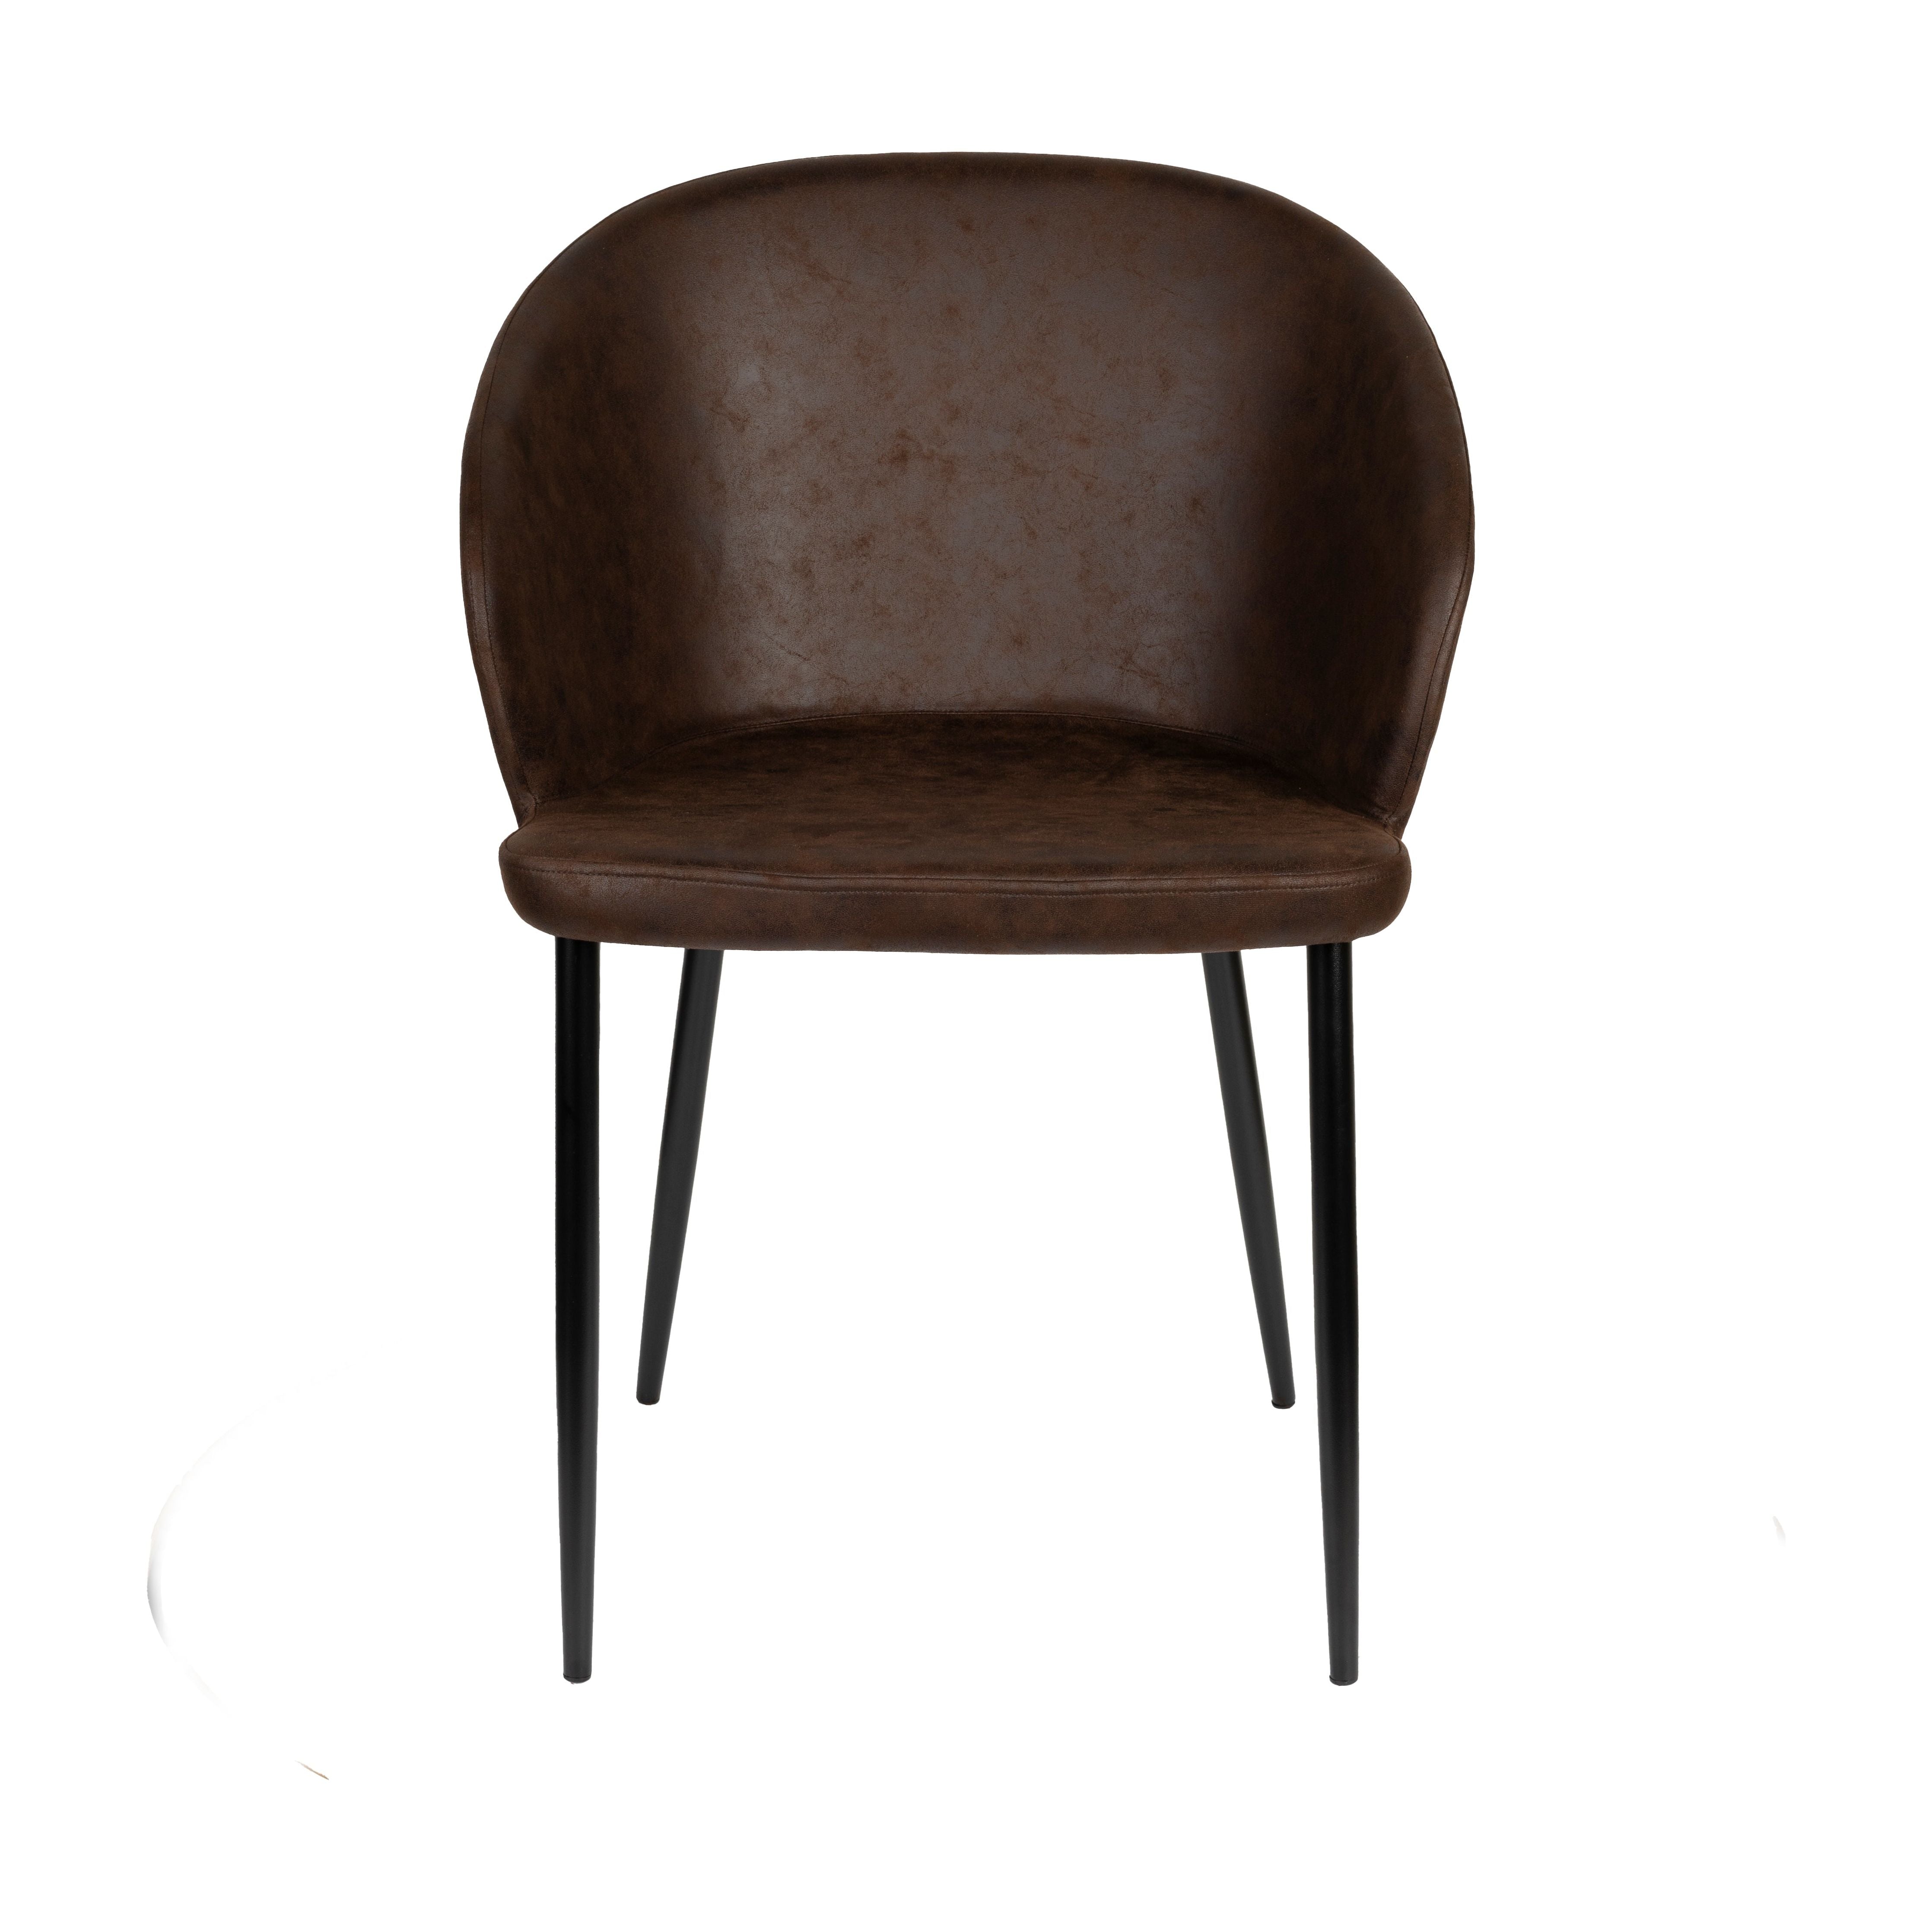 Chair hadid brown | 2 pieces